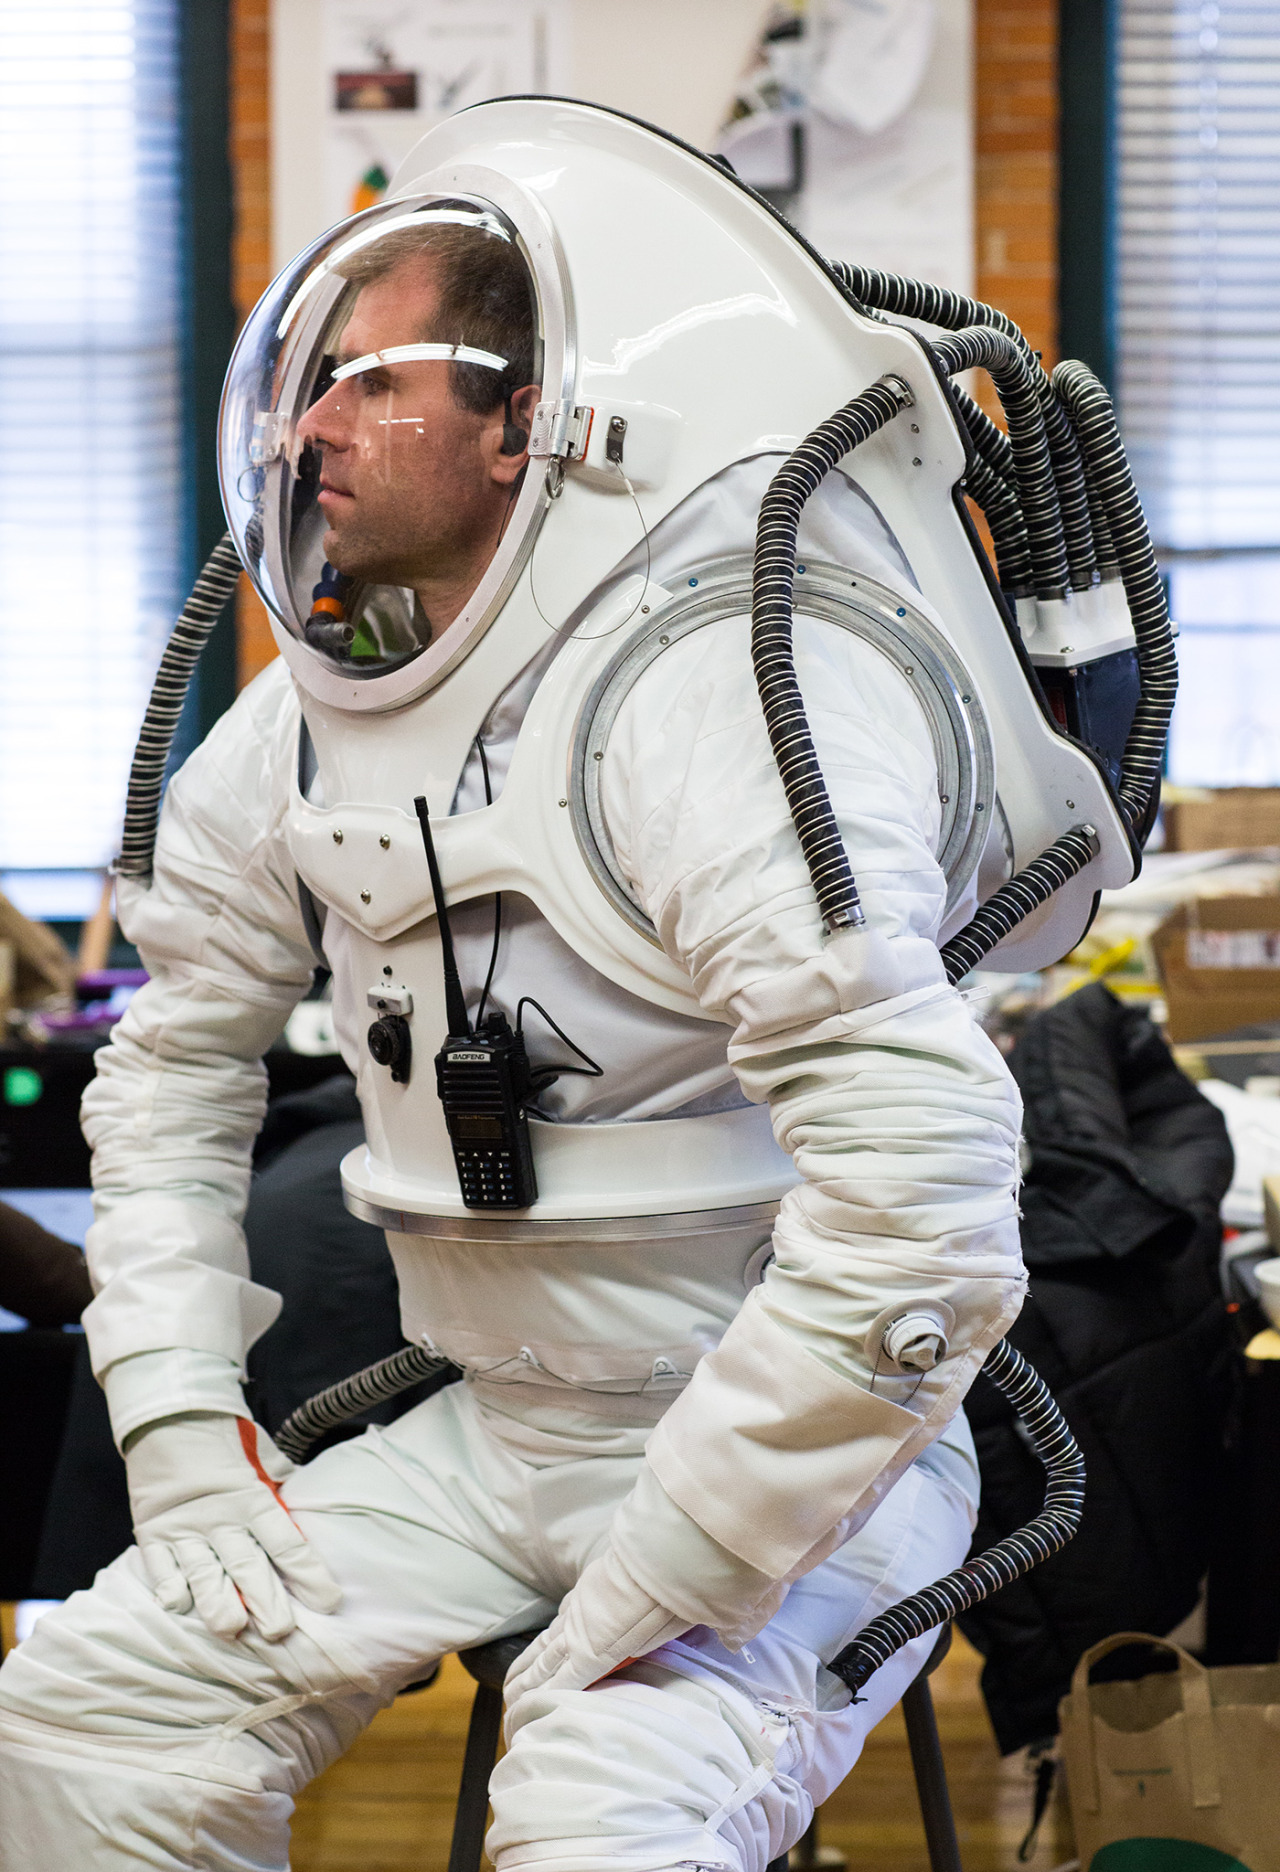 Our RISD — Mars Space Suit in the News